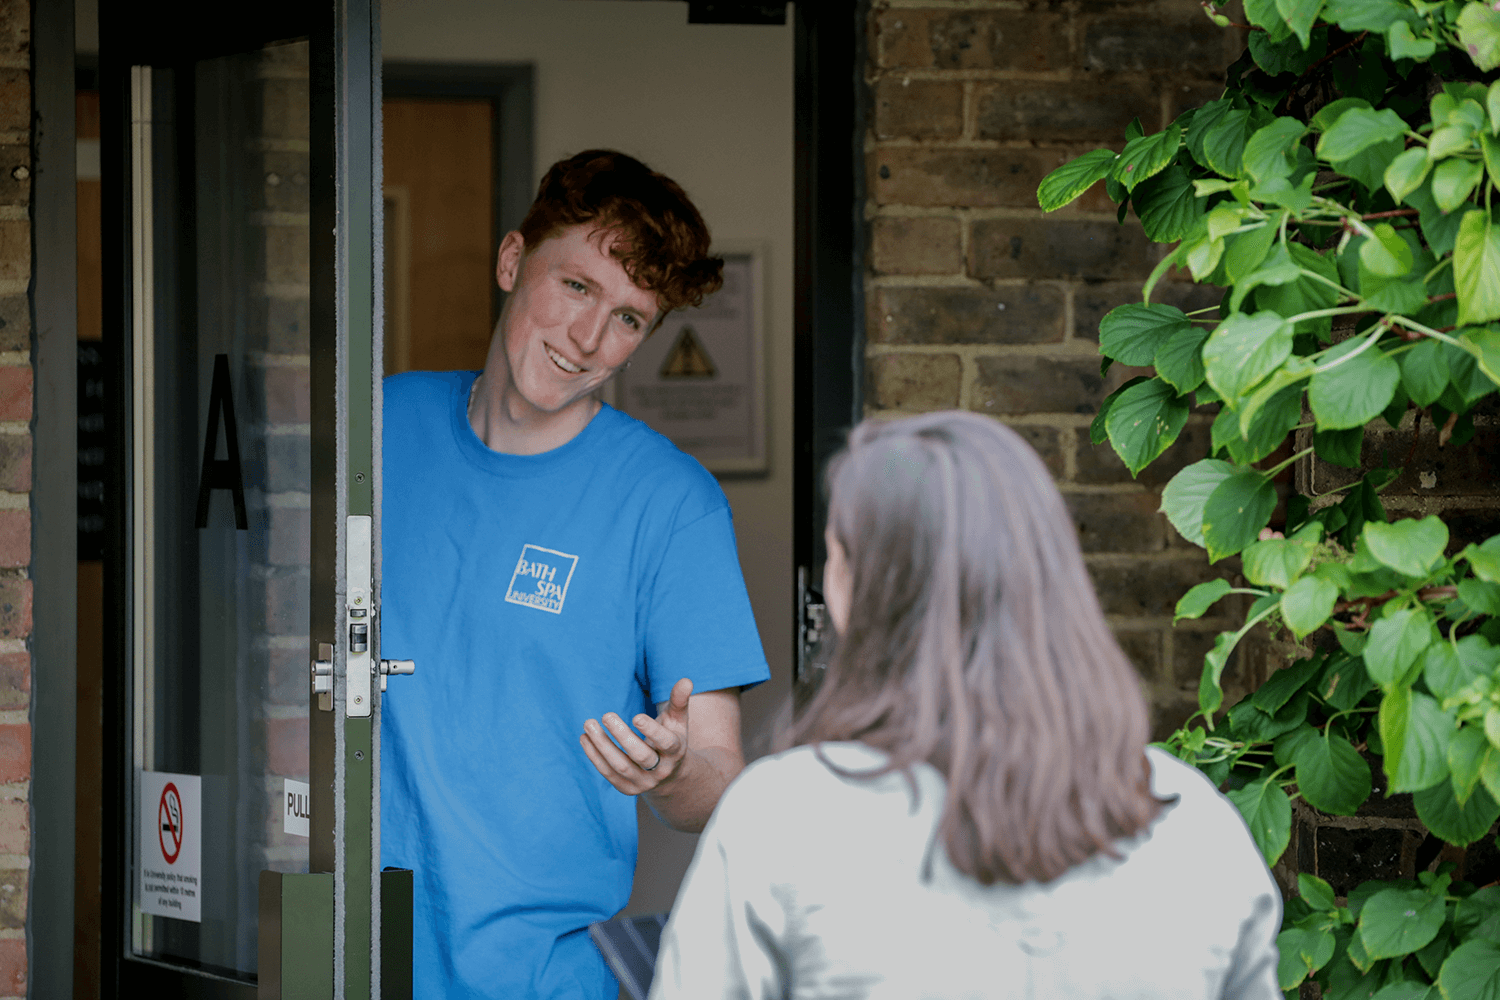 A white male student with red hair and wearing a blue shirt stands in the doorway of a hall of residence. He is smiling and talking to another student,